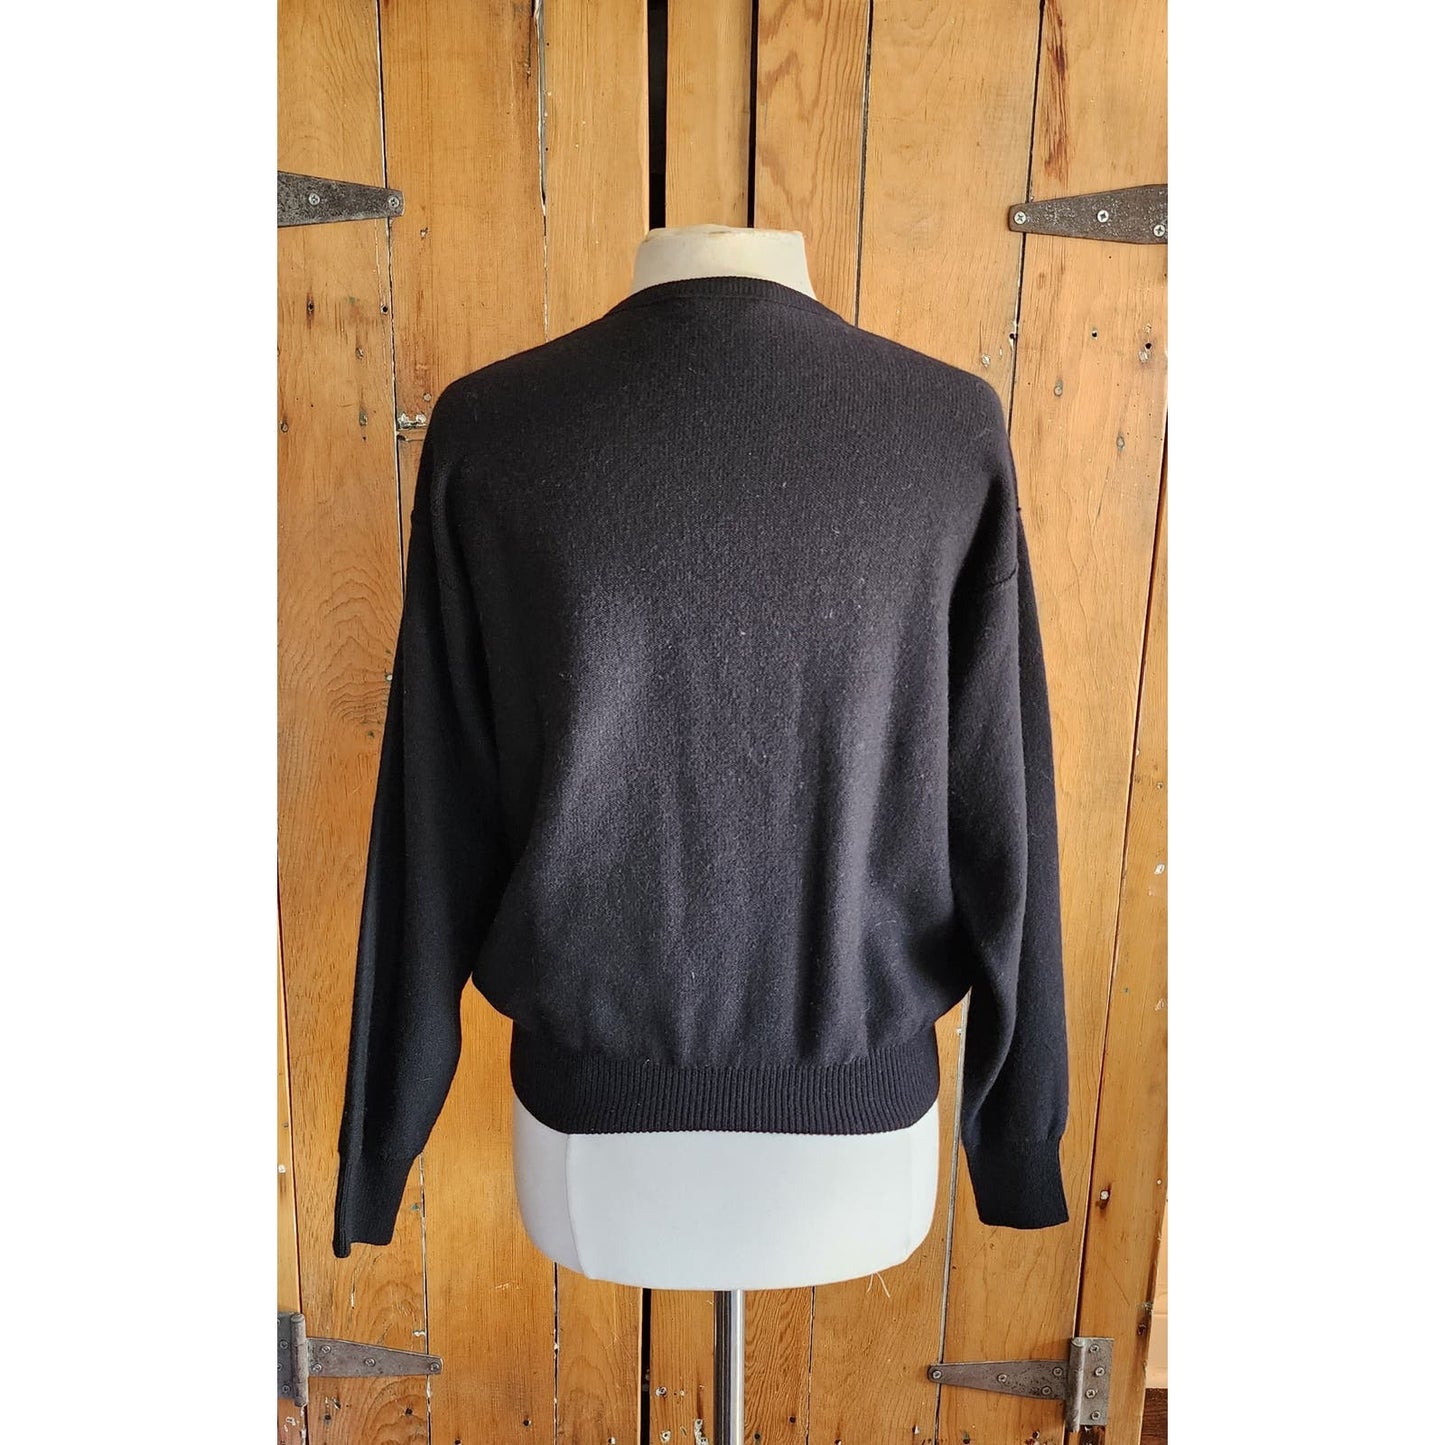 Vintage 90s Sonia Rykiel Black Sweater Buttons at Shoulder